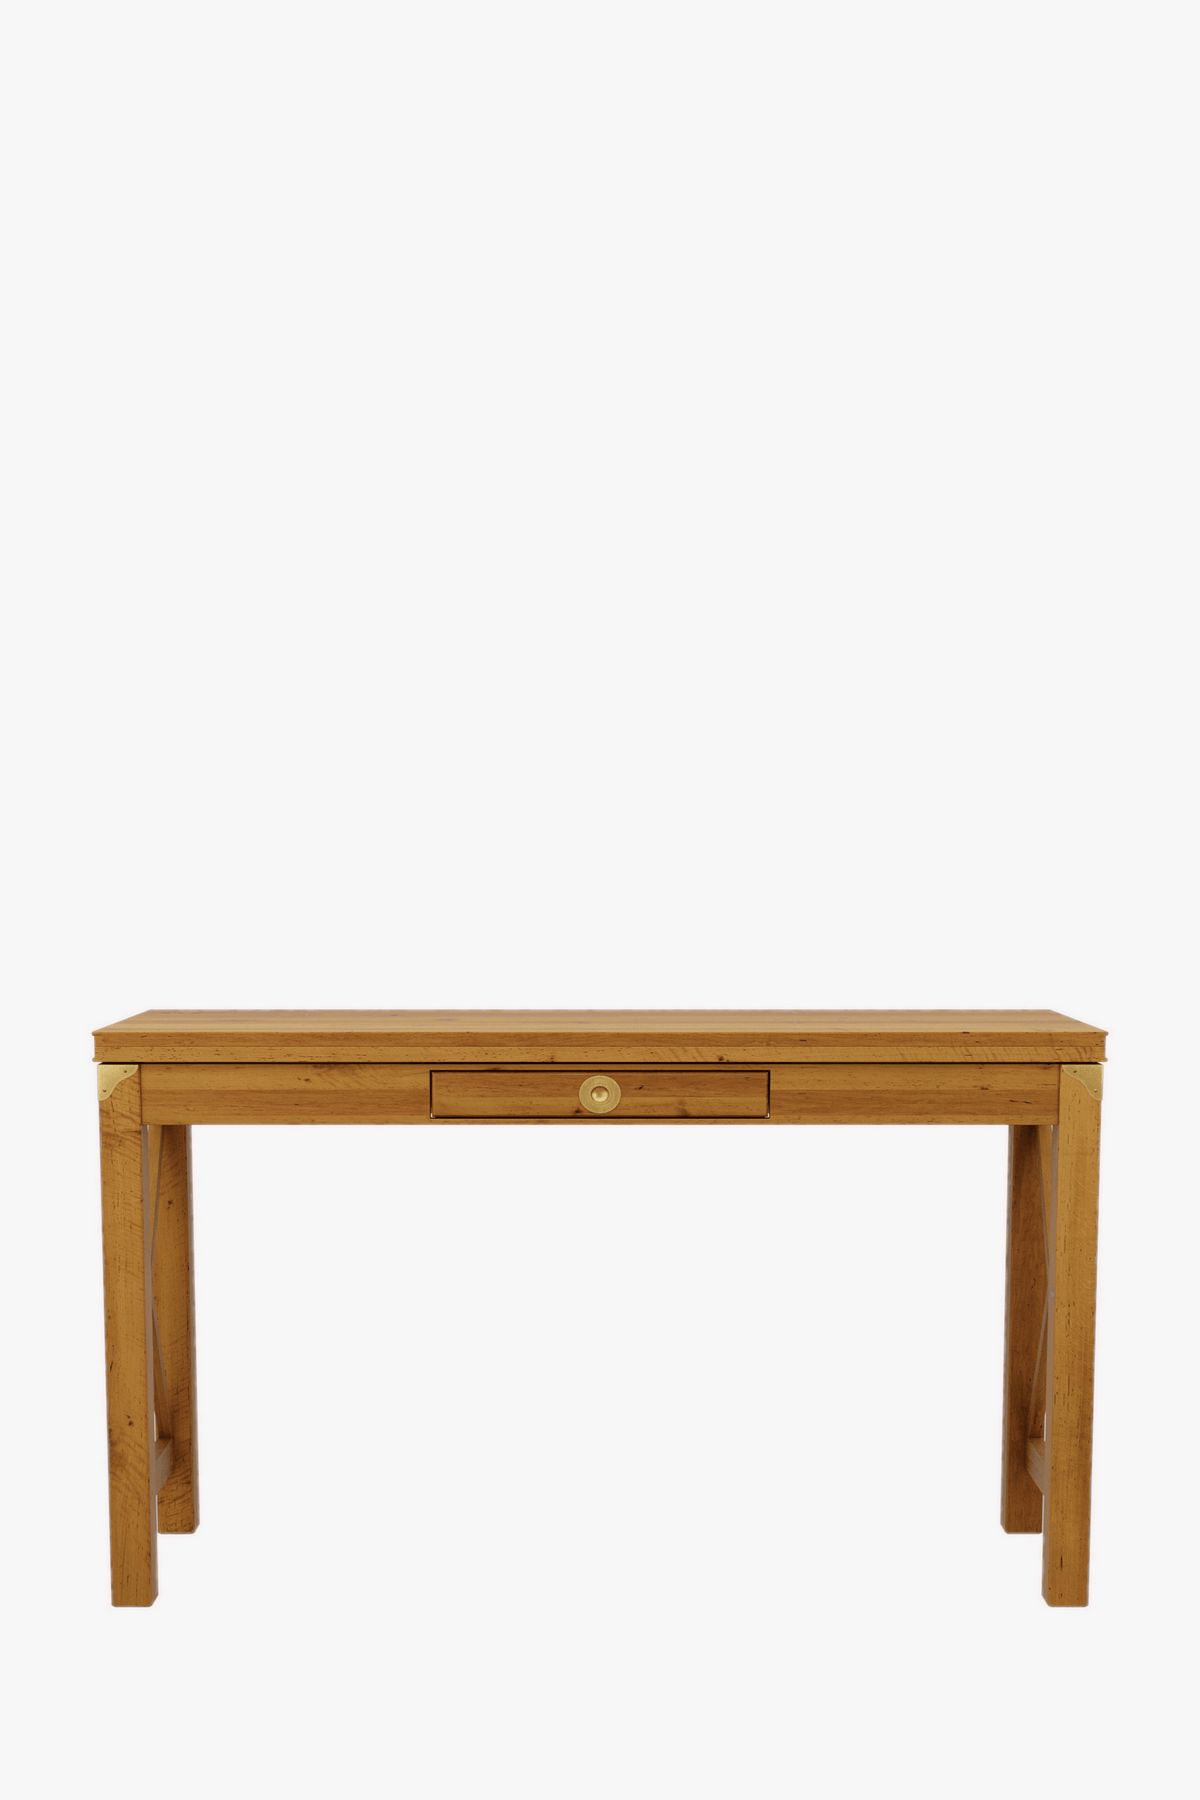 Balmoral 1 Drawer Console Dining Table